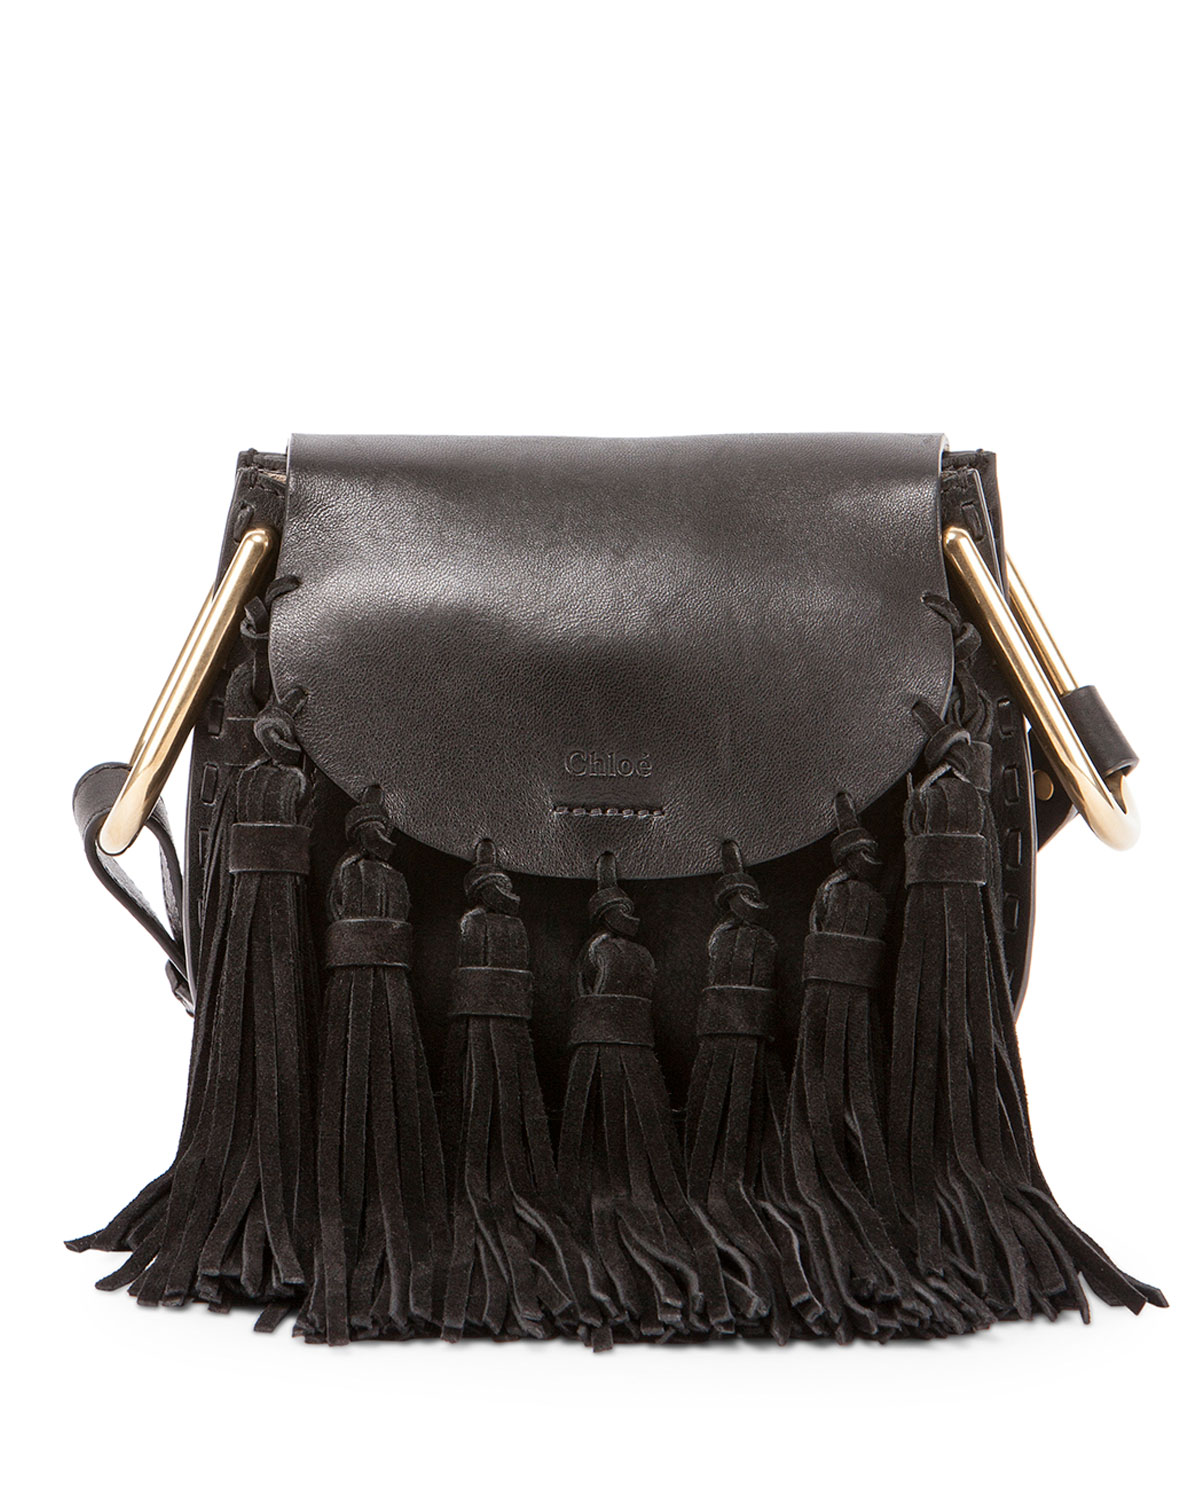 Chloe Fall / Winter 2015 Bag Collection Featuring Fringe Bags - Spotted ...